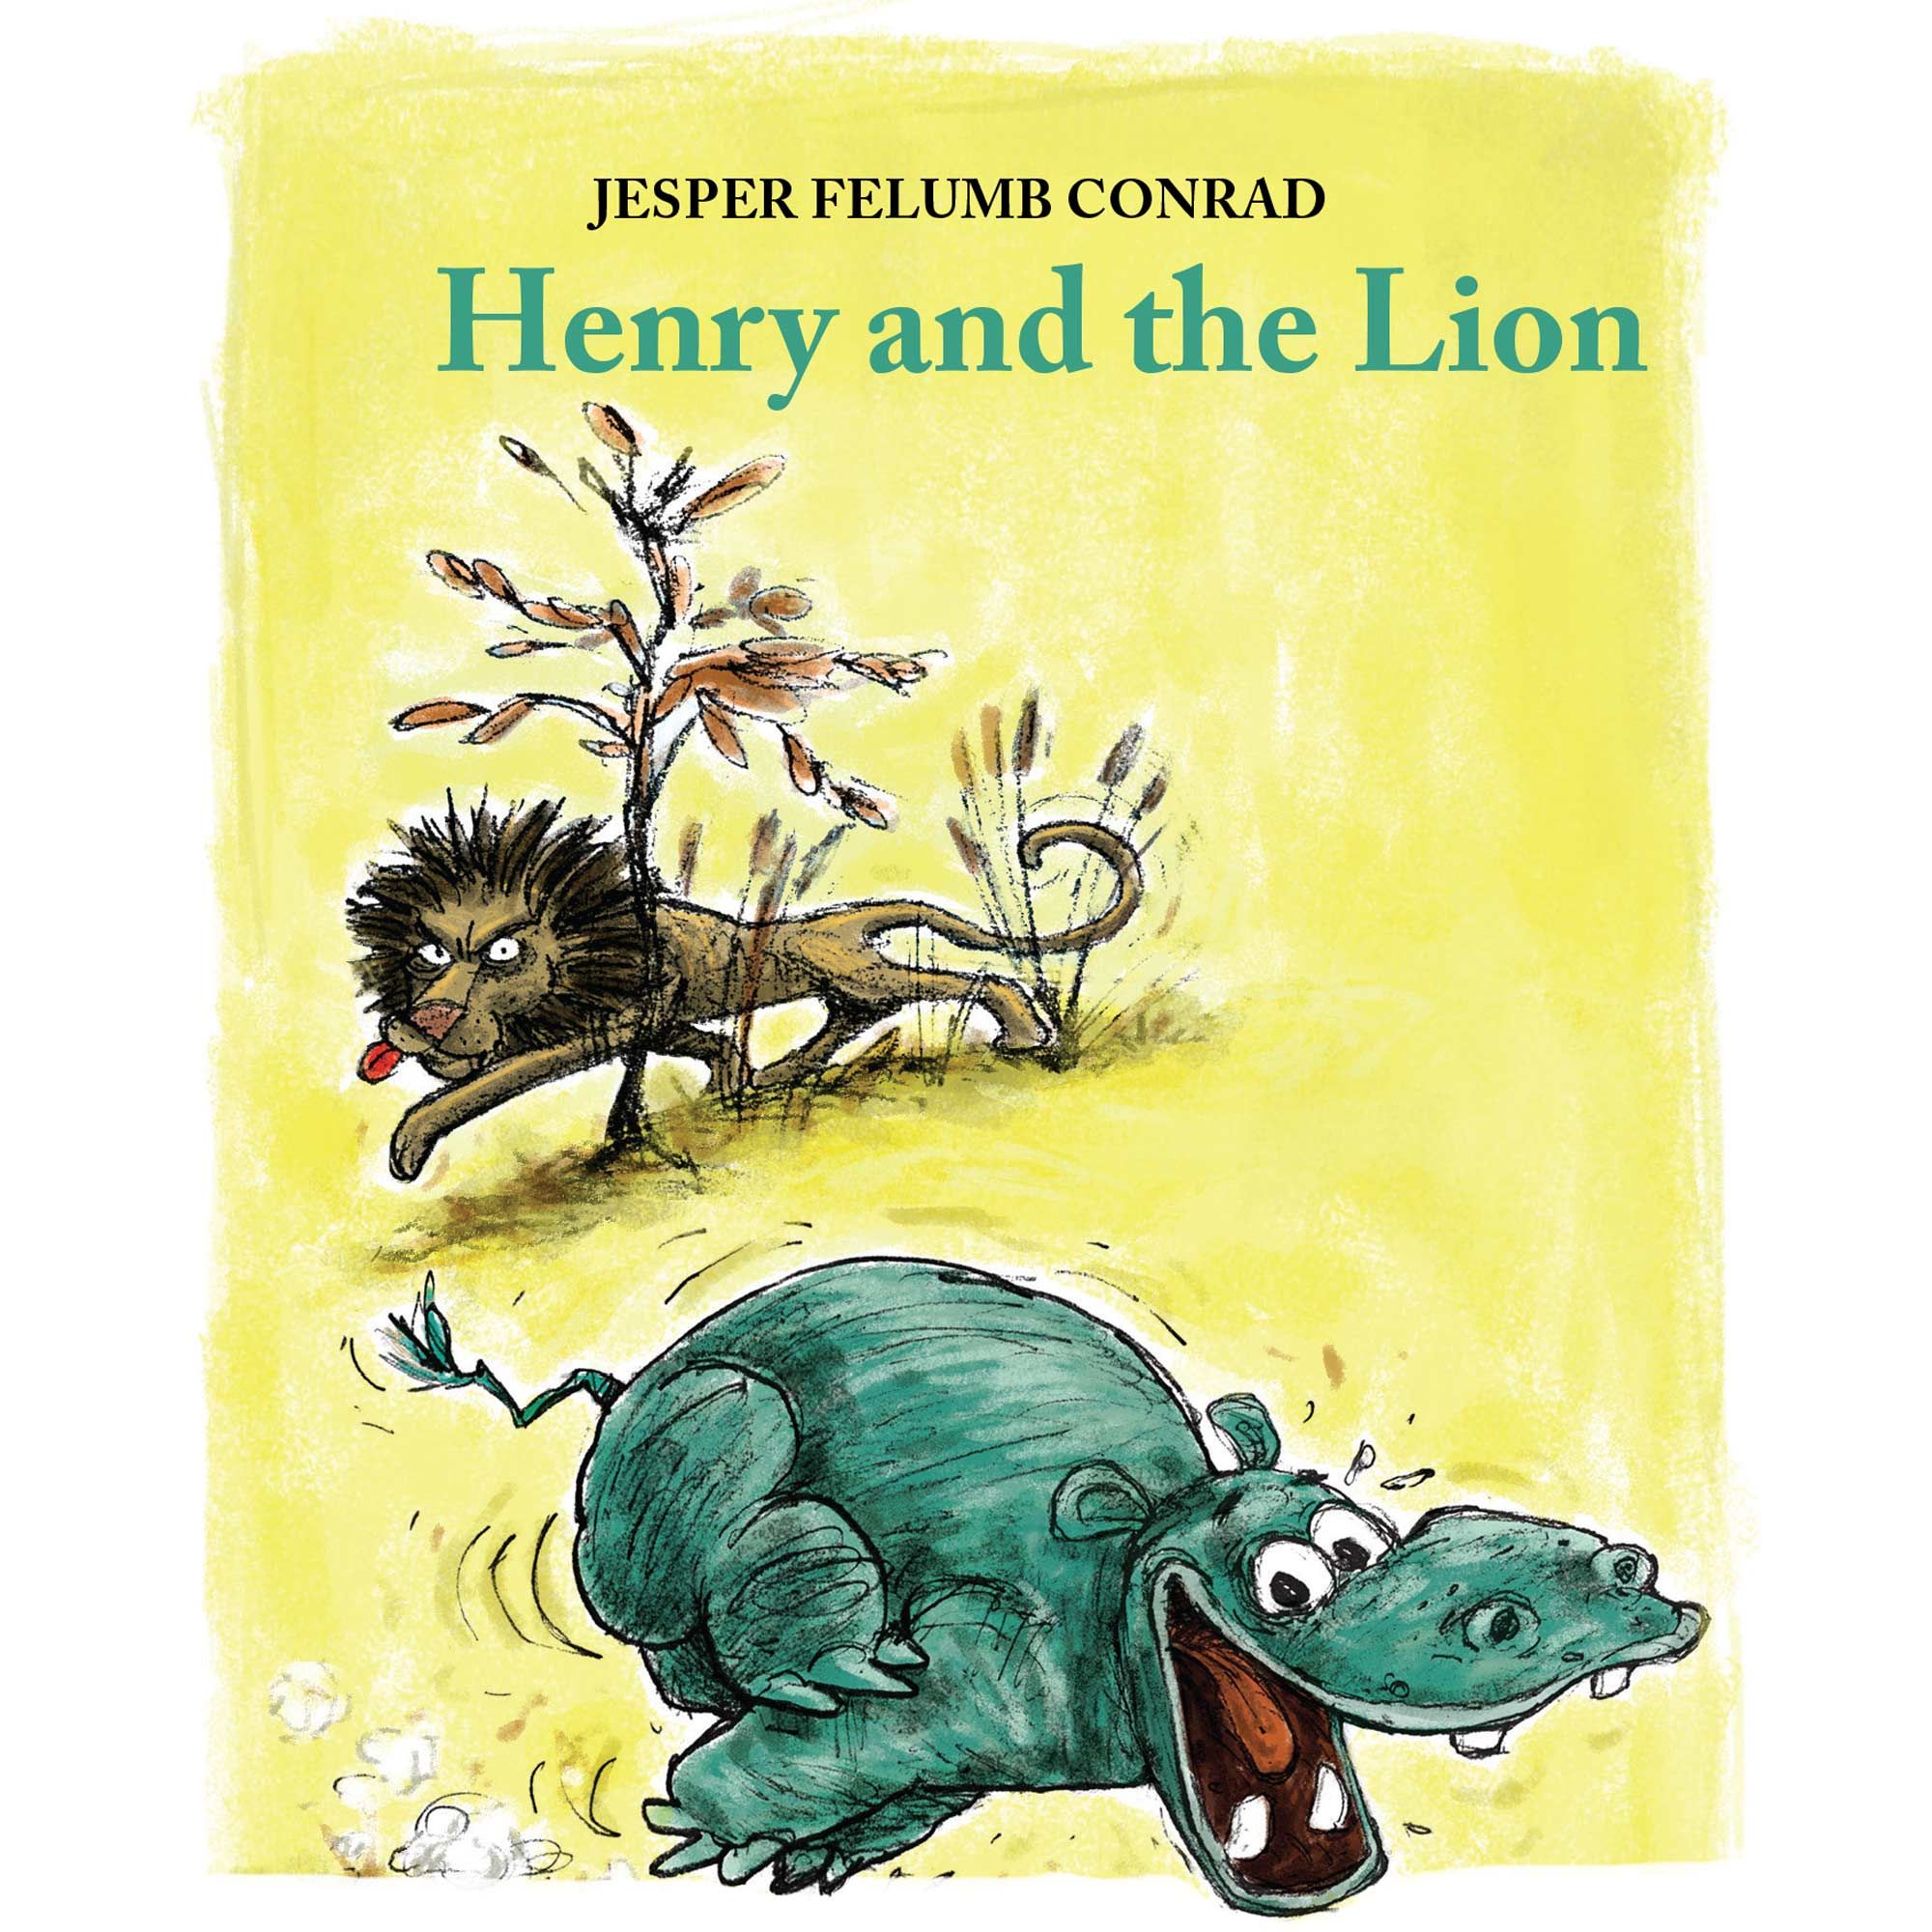 Henry and the Lion, audiobook by Jesper Felumb Conrad